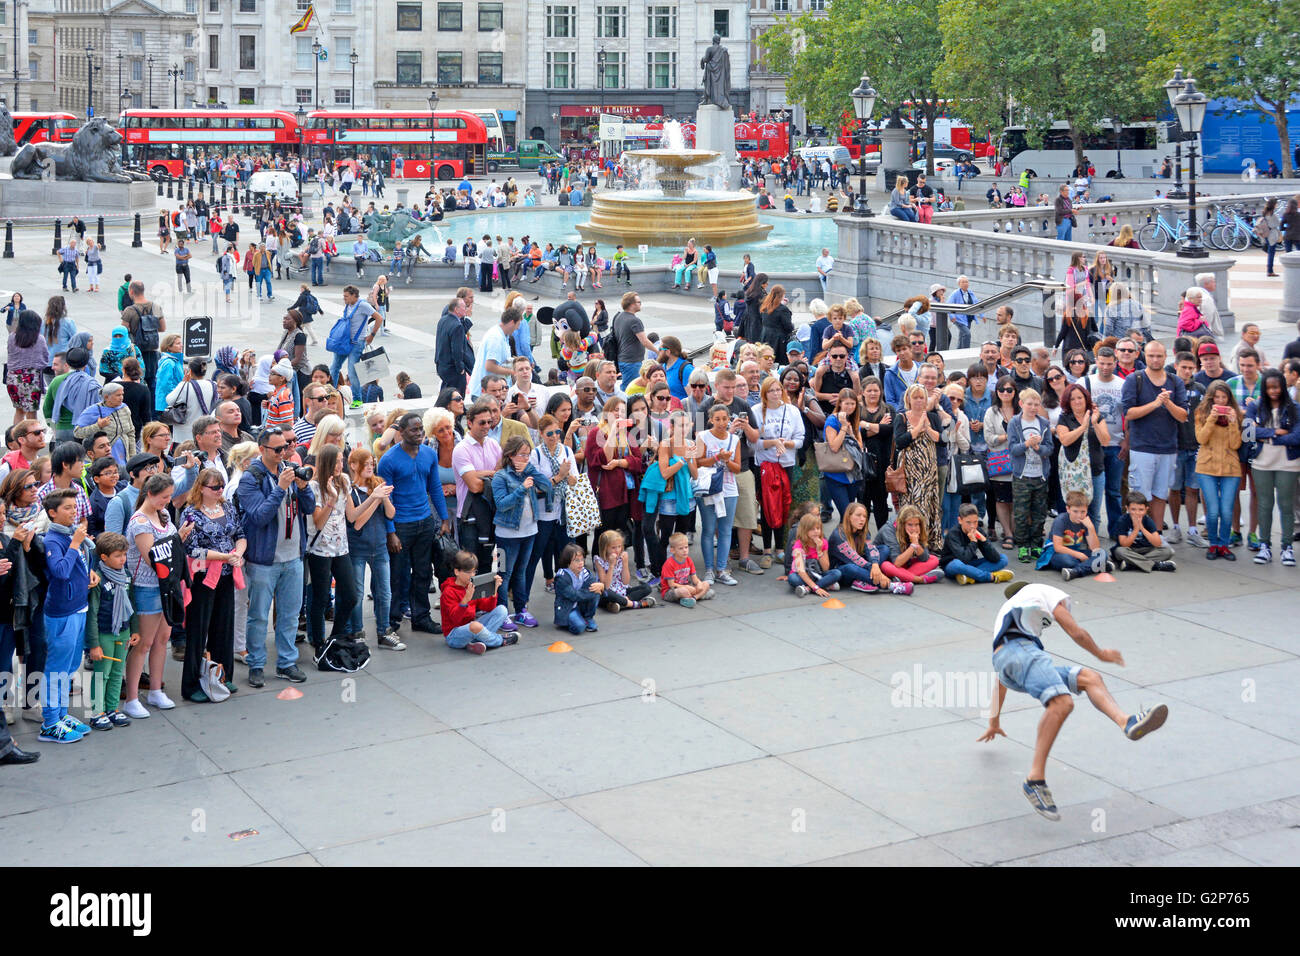 Large crowd of people including tourists gather around street performer gymnastic dancing in front of spectators in Trafalgar Square London England UK Stock Photo